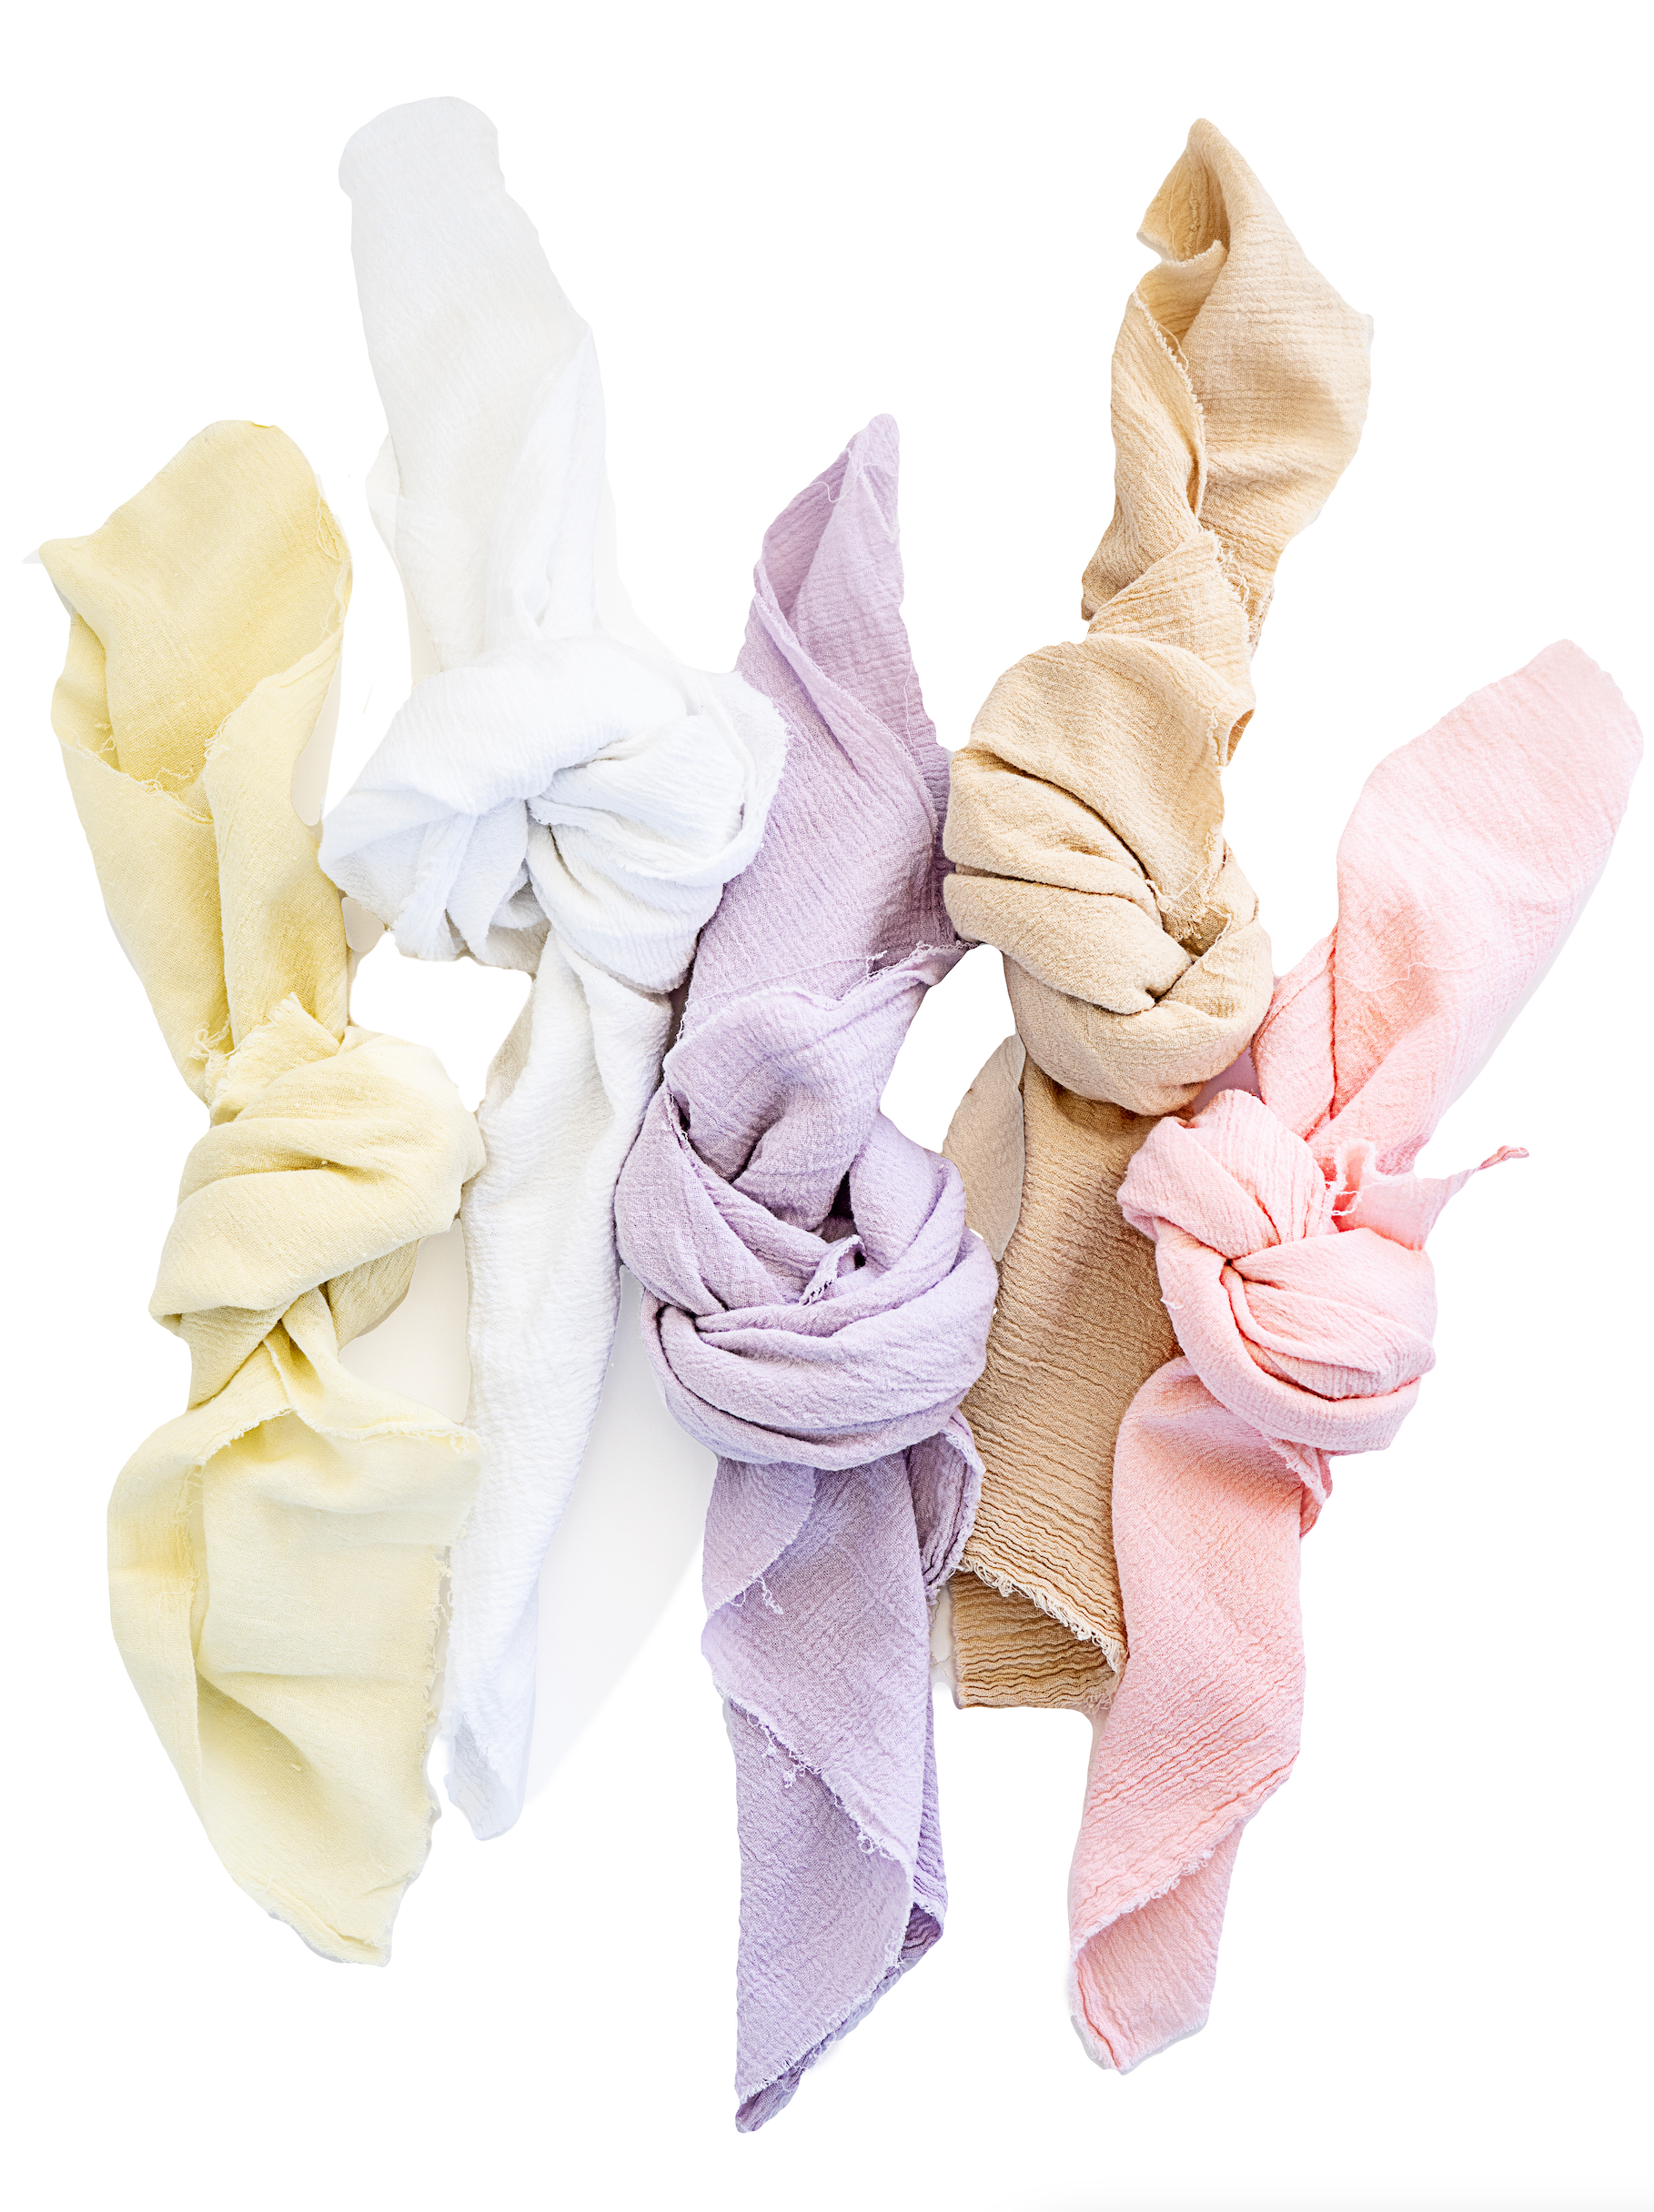 Gauze / Cheesecloth Napkins and Table Runners